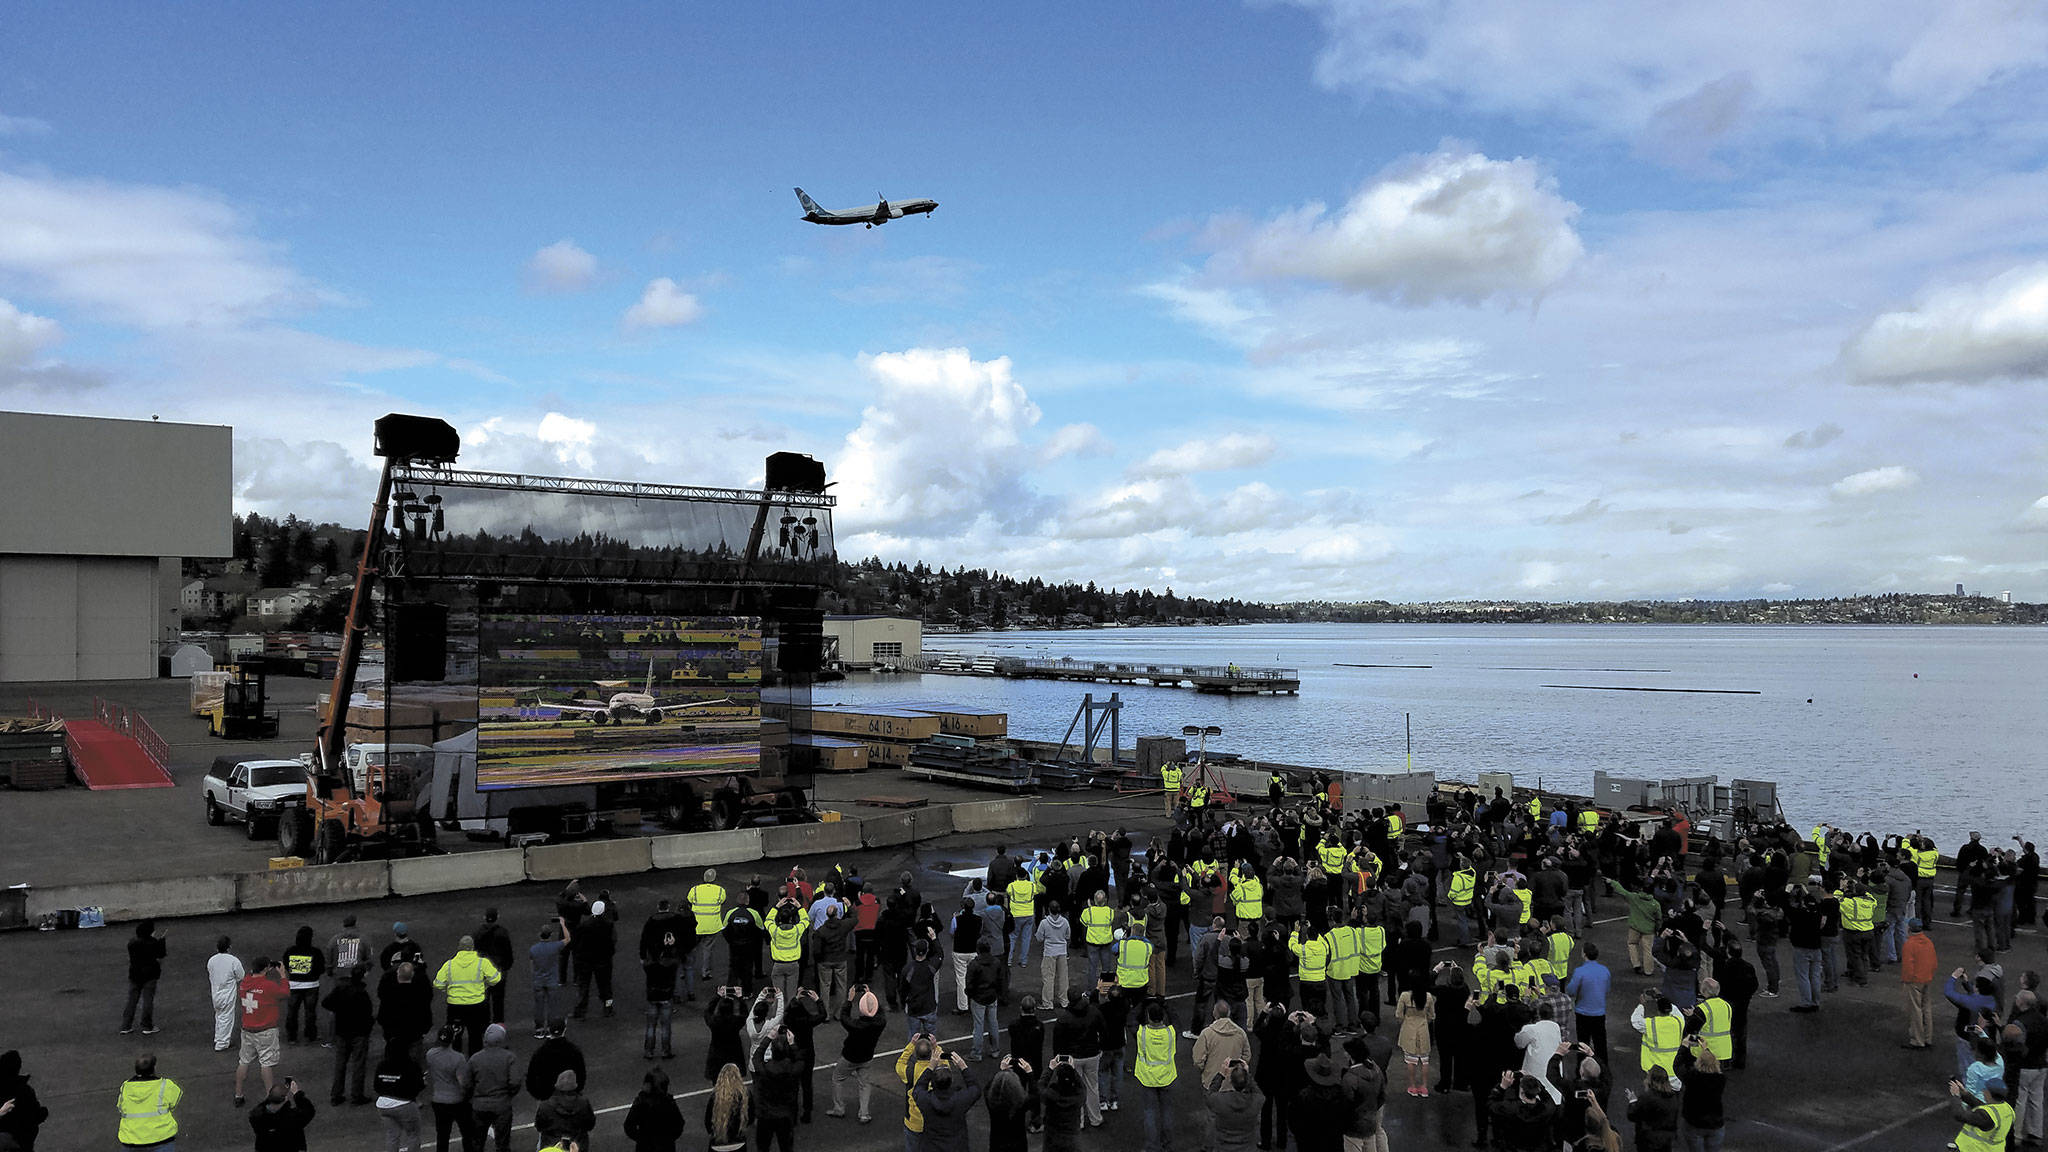 Employees at Boeing Renton watch as the 737 MAX 9 takes to the skies above Lake Washington for its first flight.